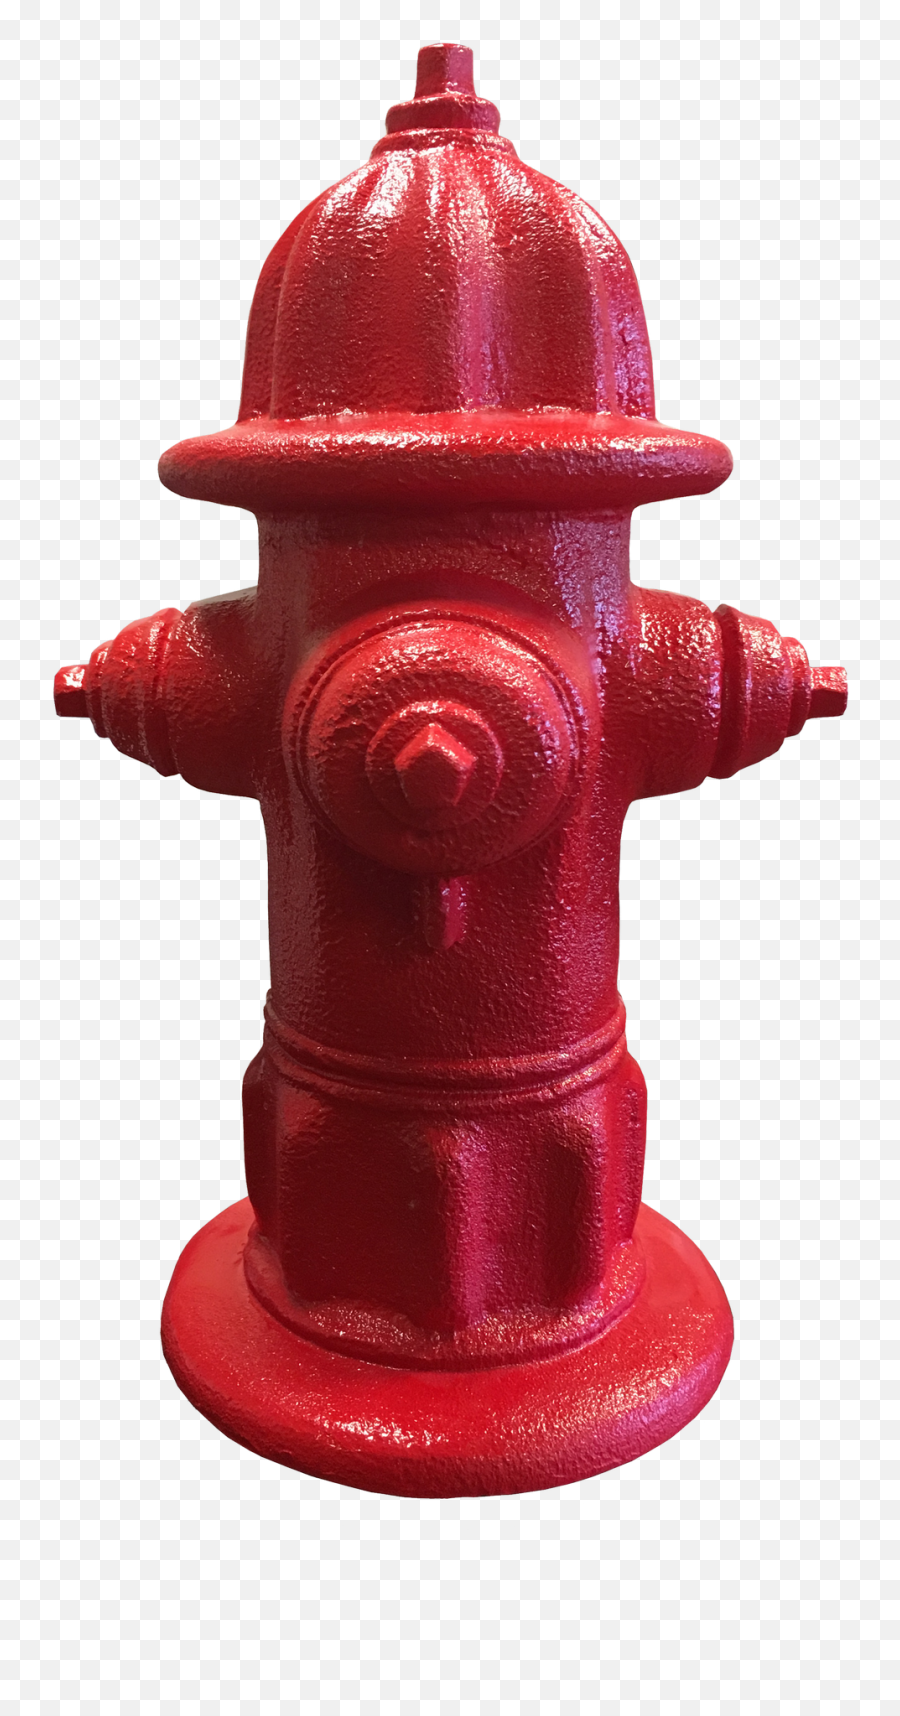 Fire Hydrant Png Image - Transparent Background Fire Hydrant Png,Real Fire Png